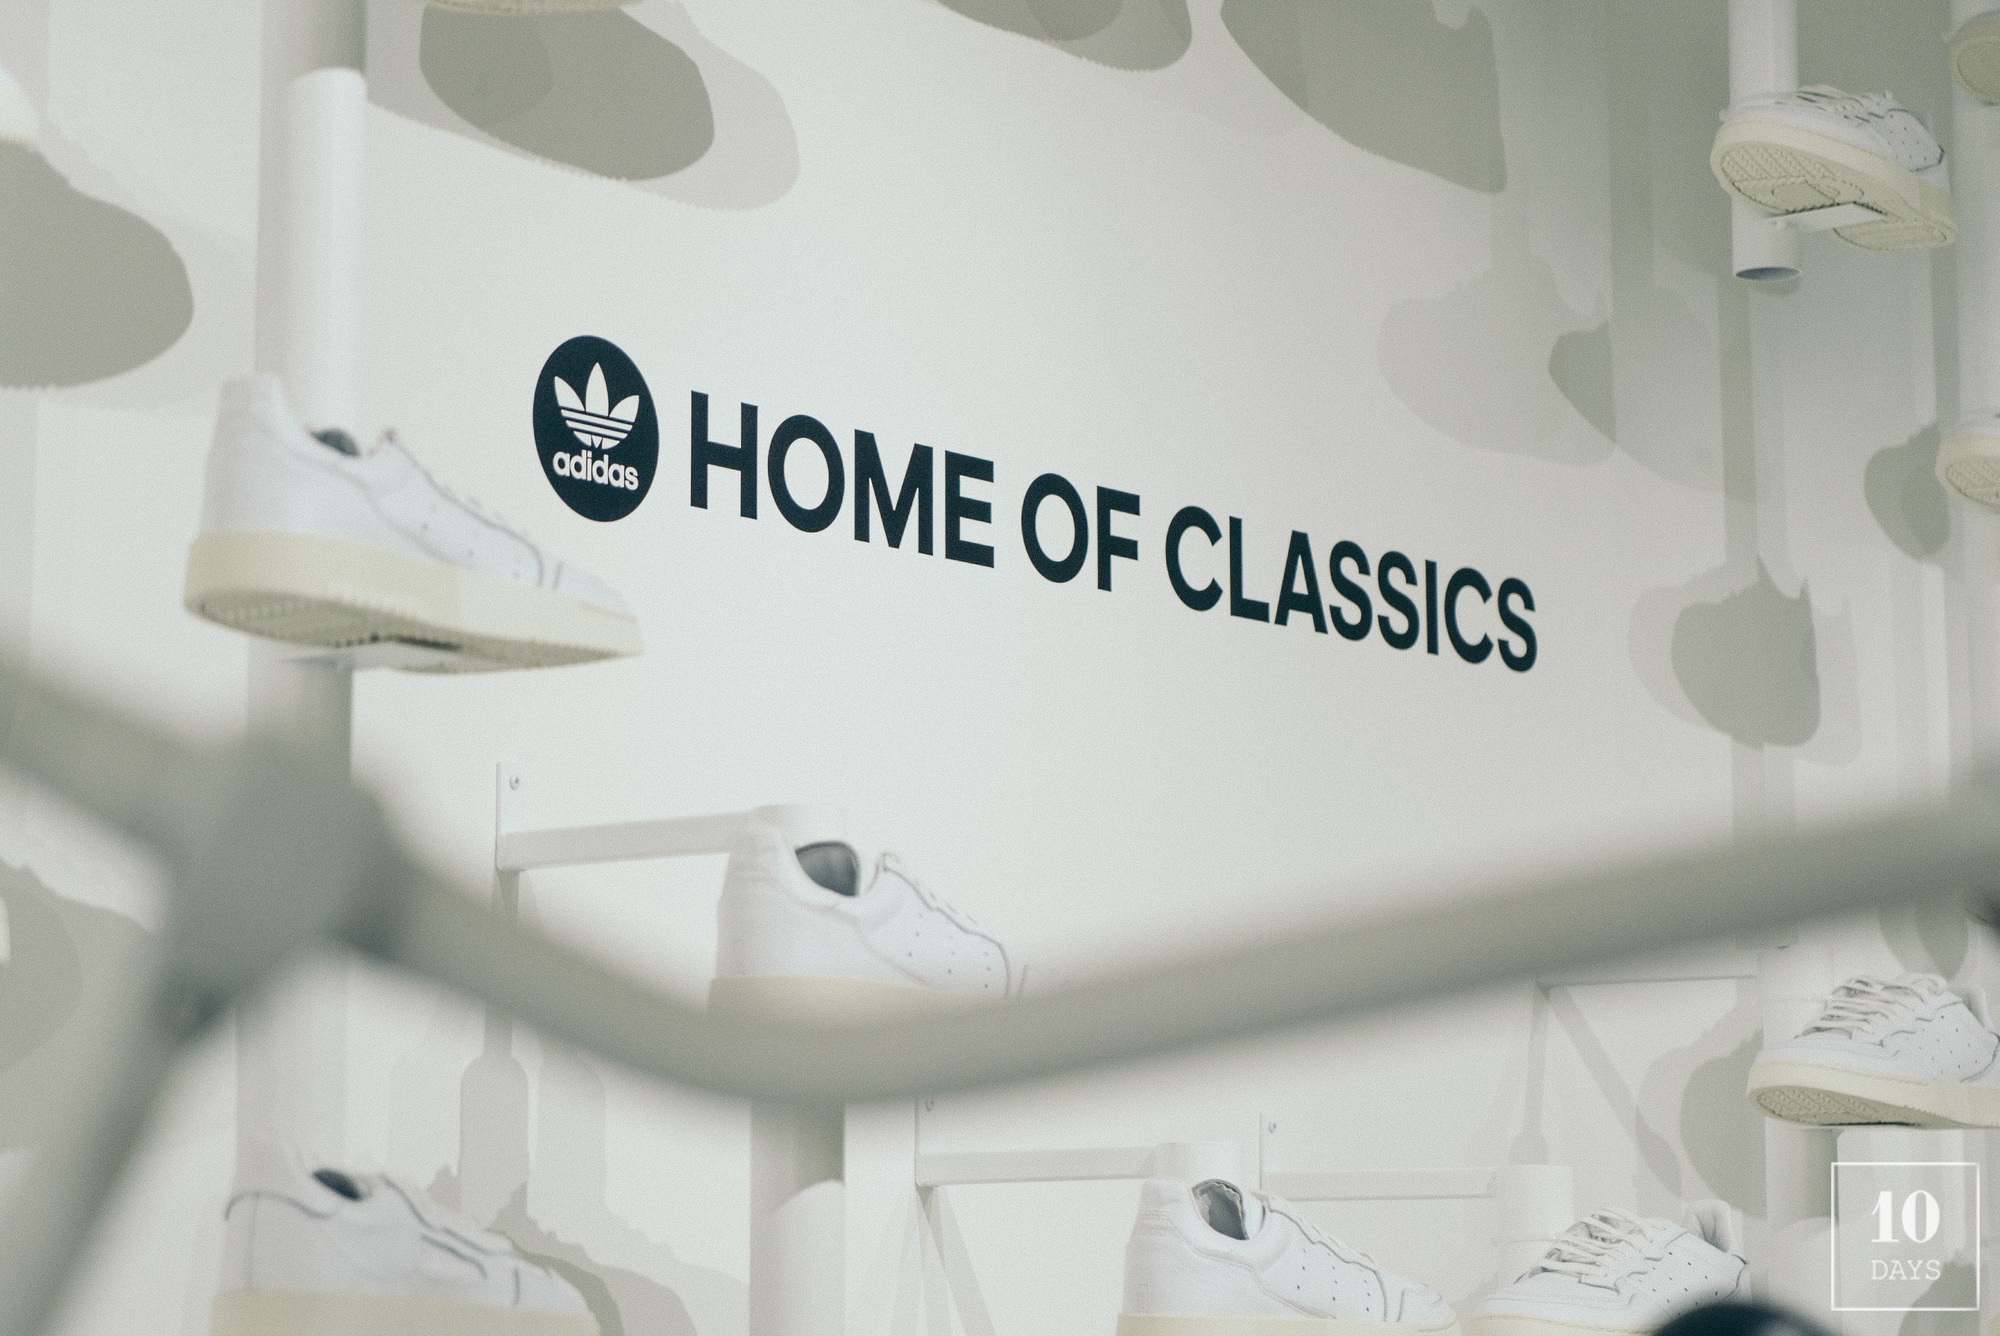 adidas house of classic